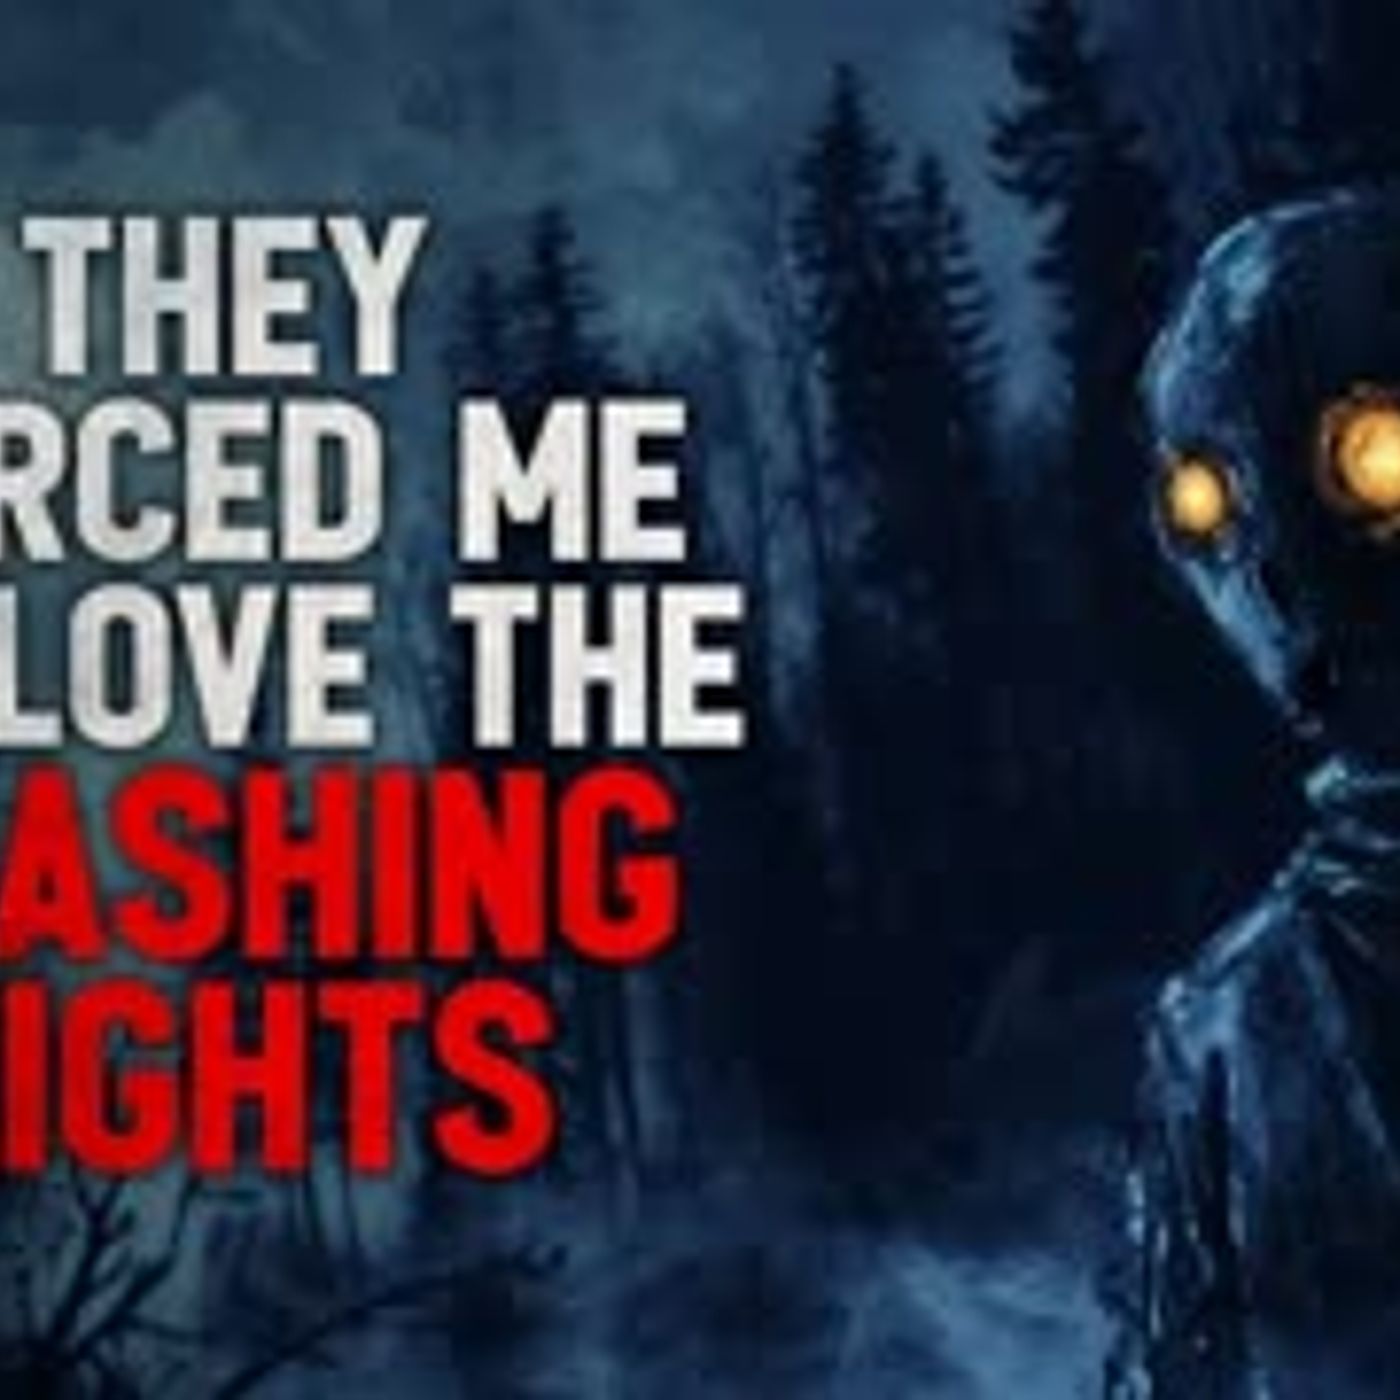 "They forced me to love the flashing lights" Creepypasta